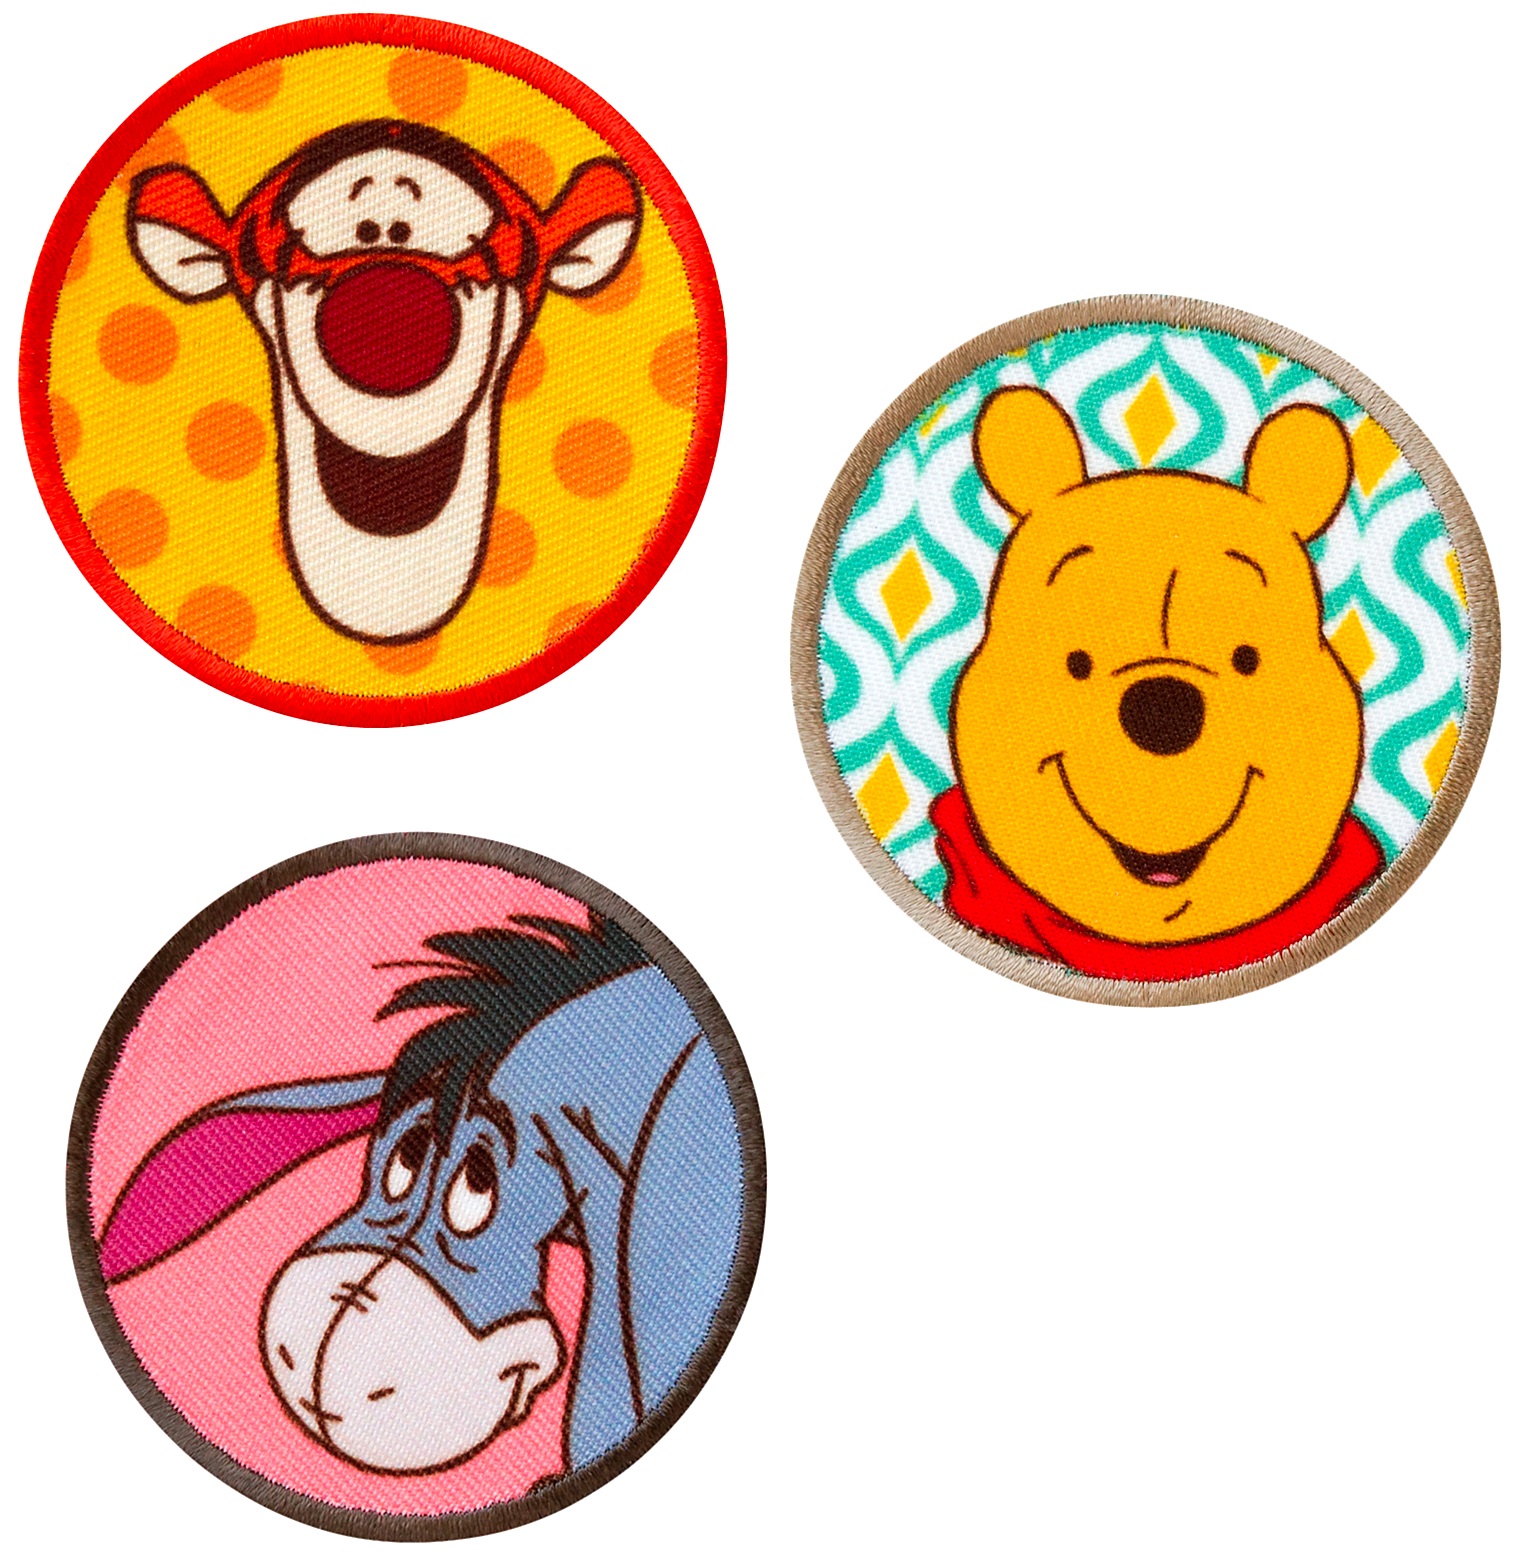 Mono Quick 1450x Pooh, Tigger, I-Ah - Applikation, Patches, Button